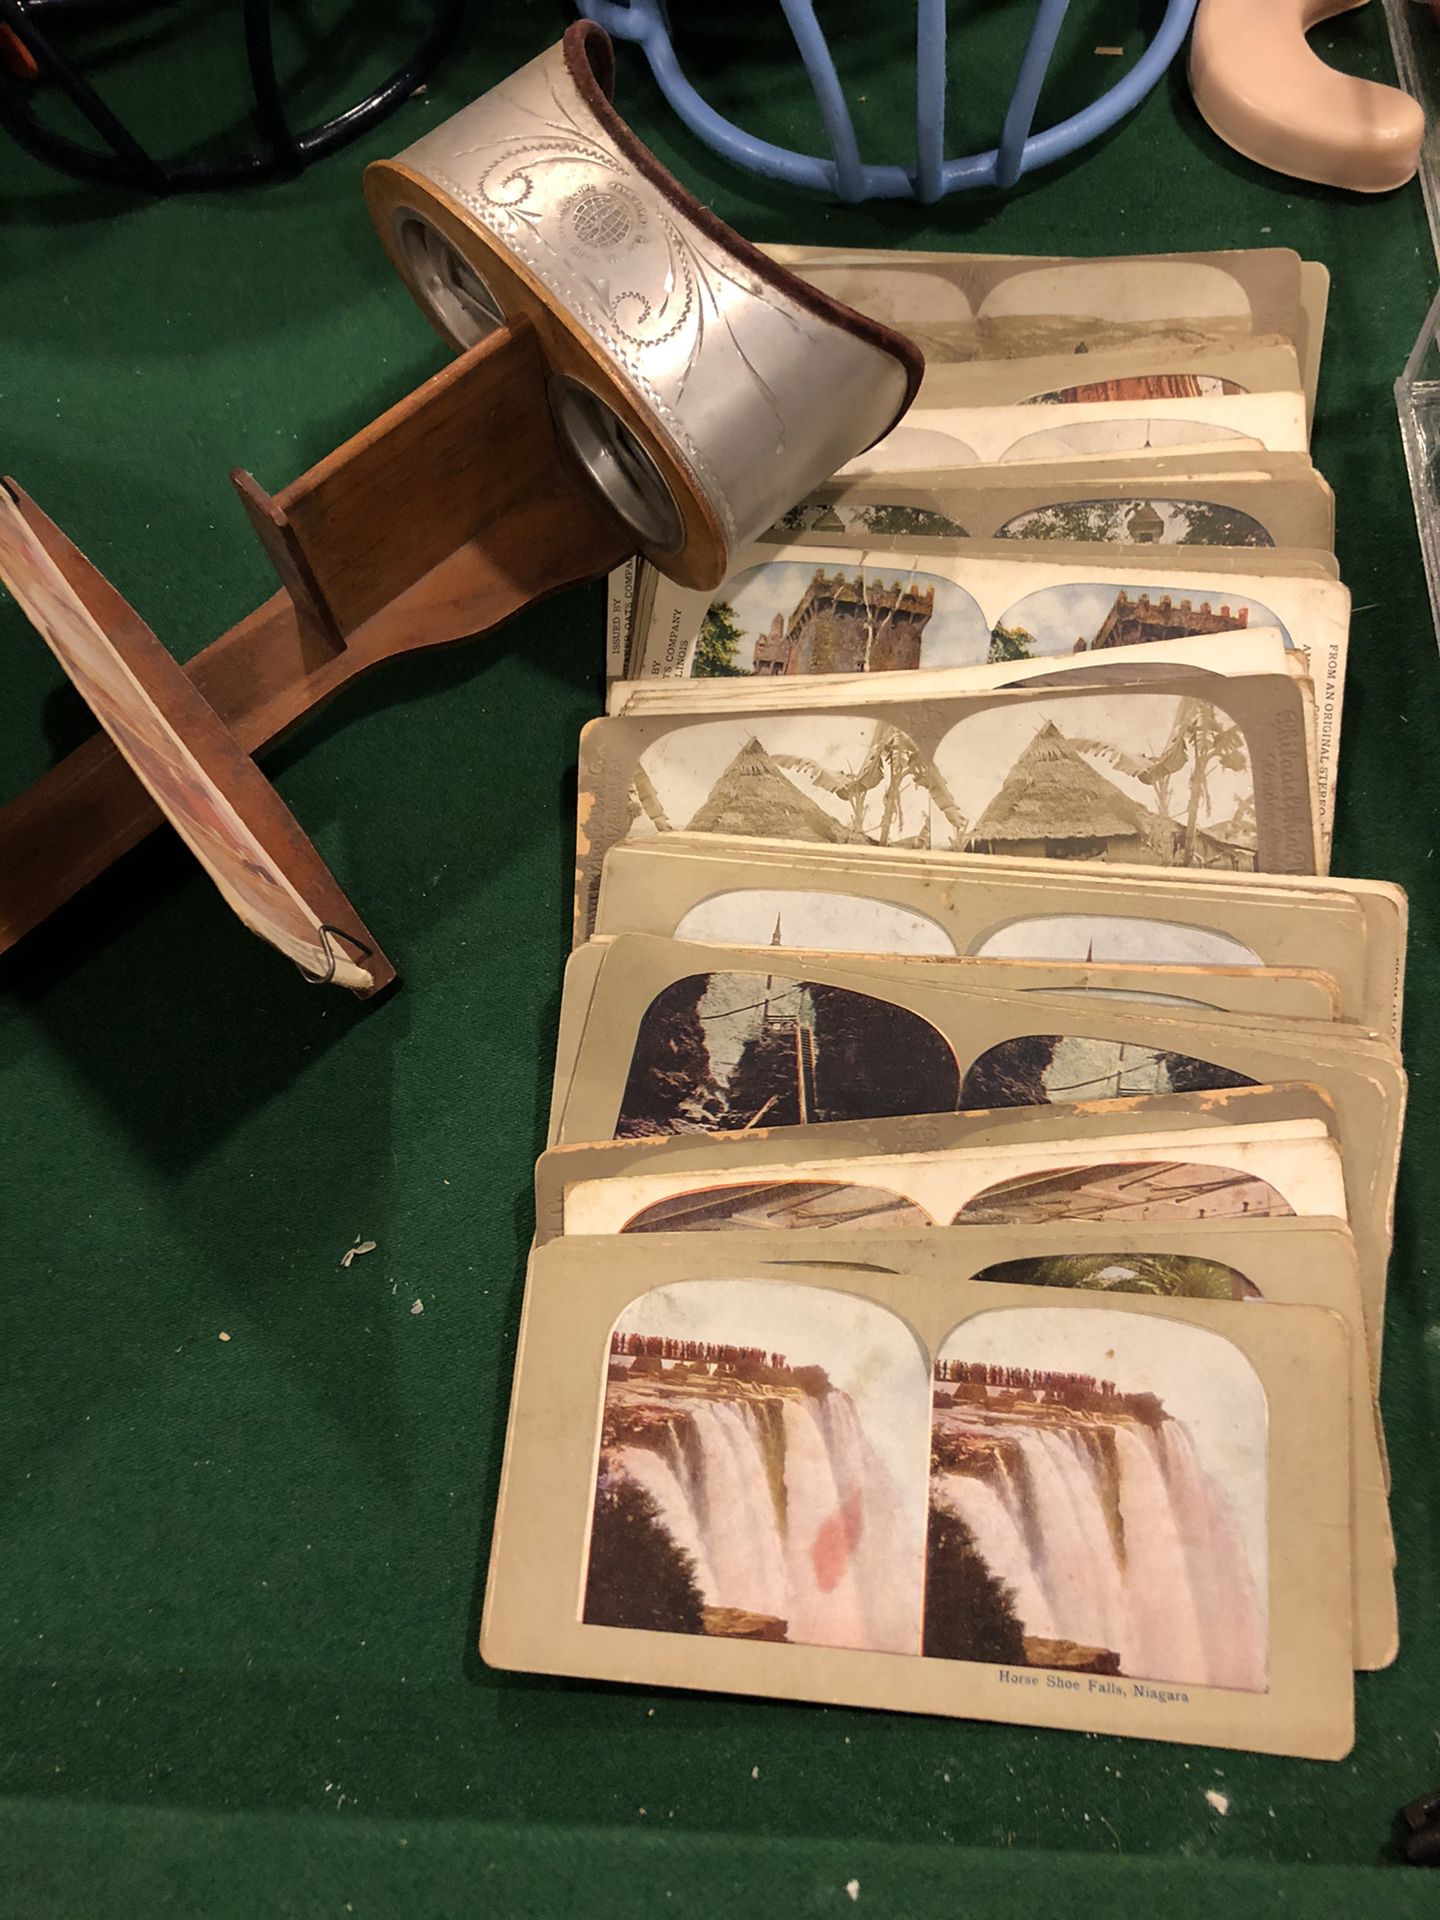 Antique Stereoscope with 47 stereoscopic images